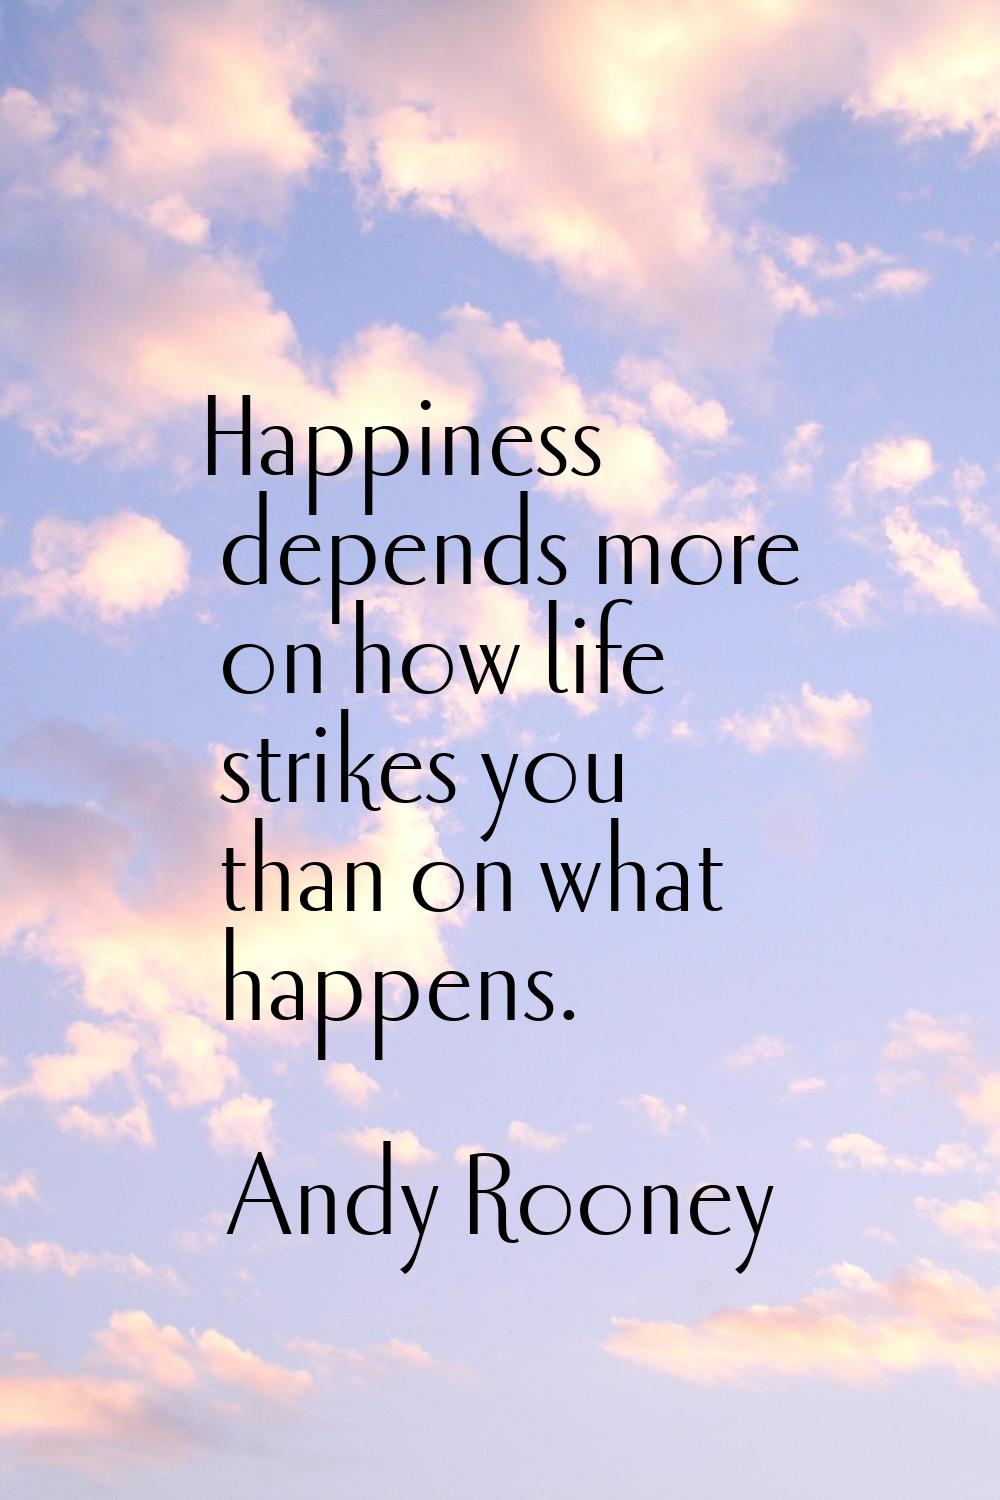 Happiness depends more on how life strikes you than on what happens.